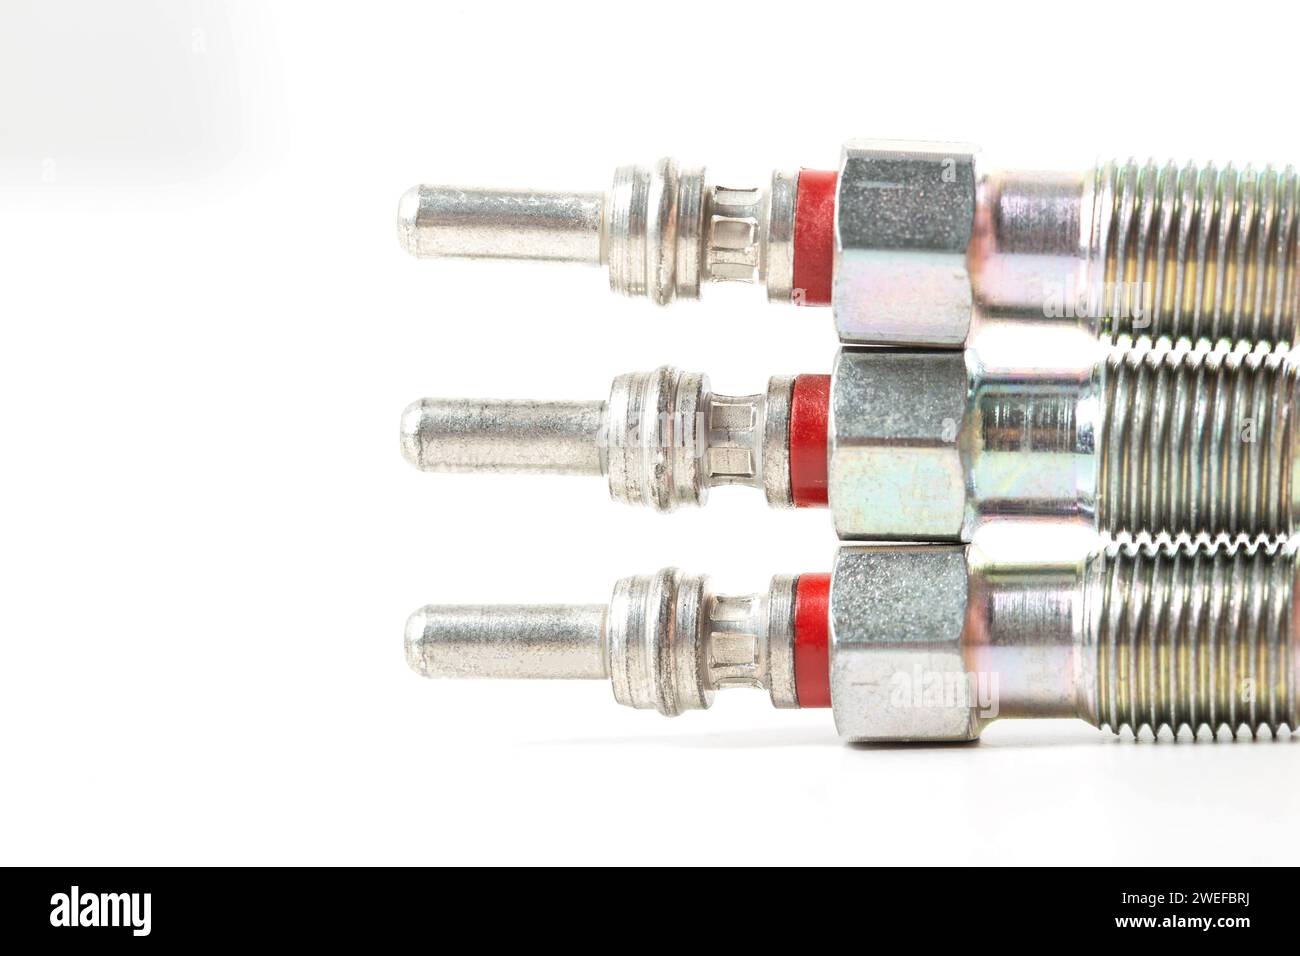 Modern ceramic glow plugs for warming up a diesel engine before starting. White background, isolate. Macro, engine start Stock Photo